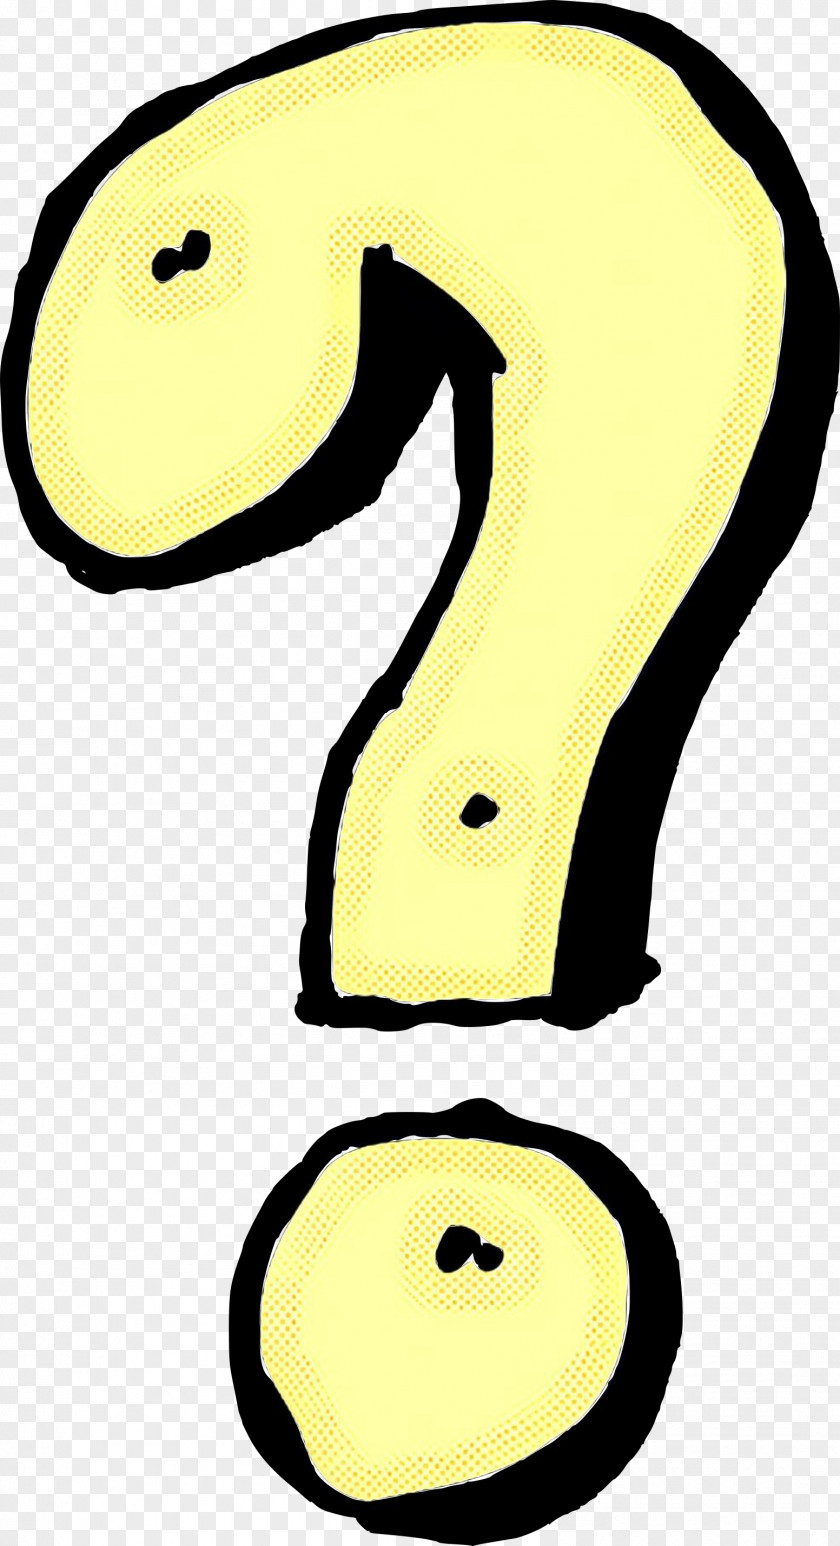 Clip Art Question Mark Transparency PNG